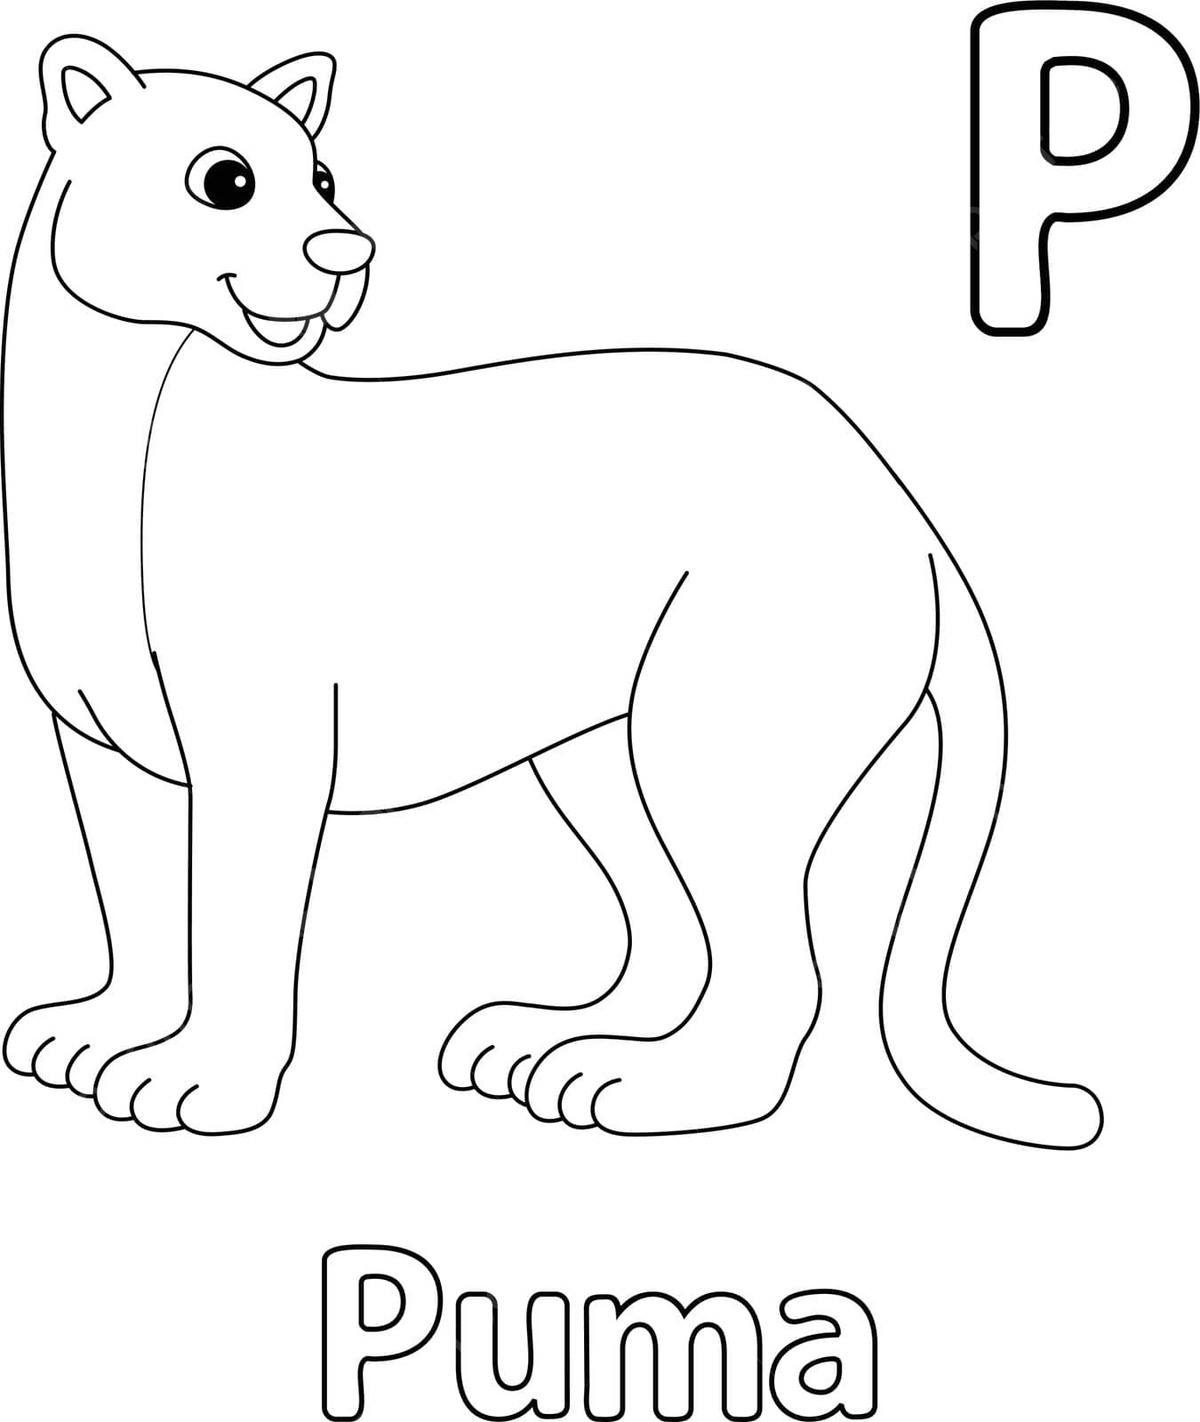 Isolated coloring page of puma for animal alphabet abcletter p vector color safari education png and vector with transparent background for free download